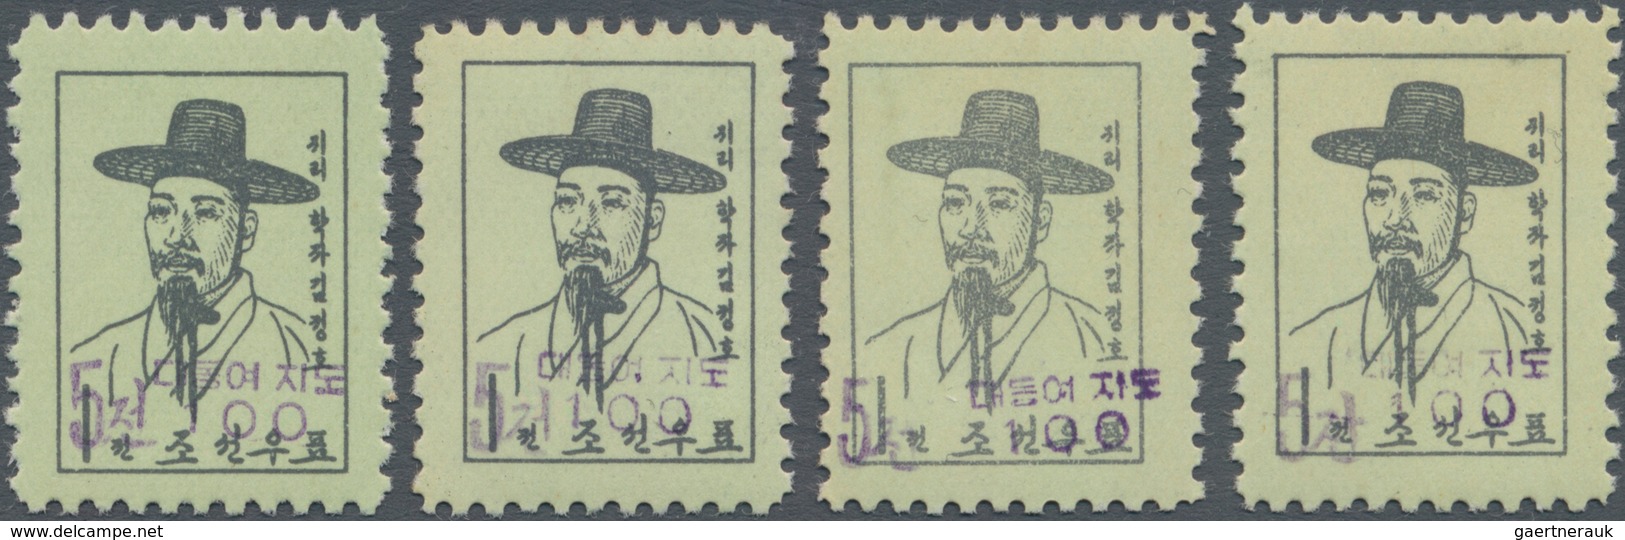 Korea-Nord: 1961, 5 Ch./1 Ch. Surcharge Kim Jung-Ho, Four Copies, MNH (3), Unused Mounted Mint (1). - Korea (Nord-)